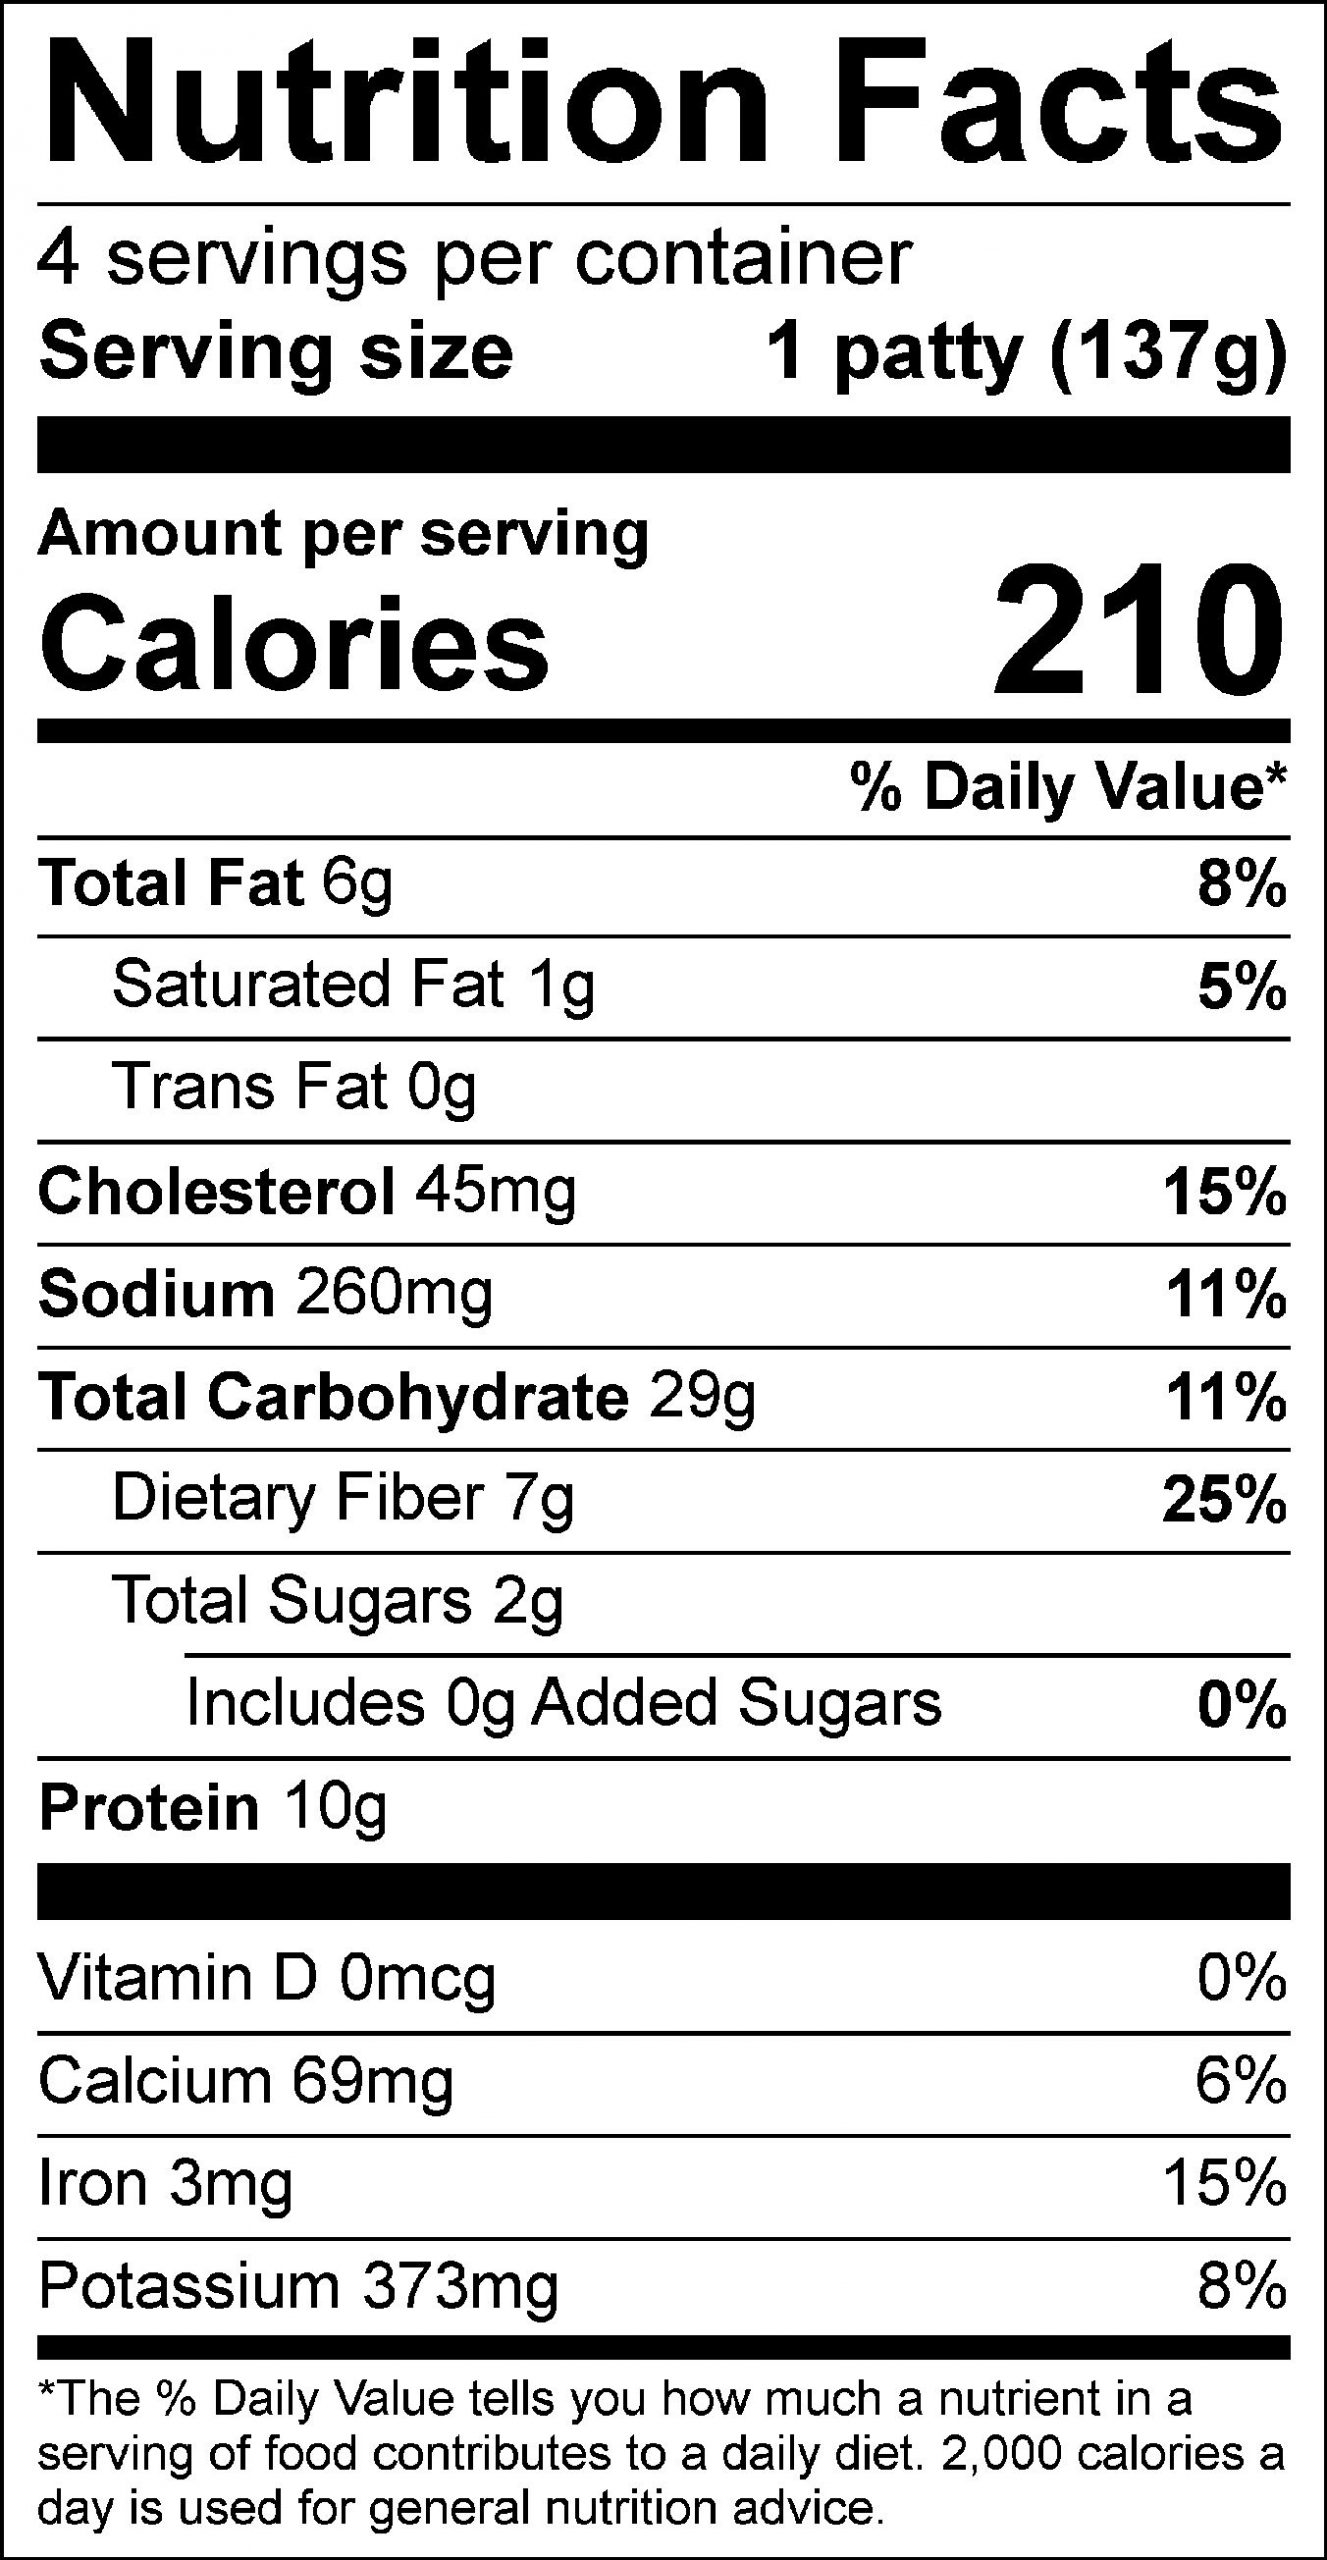 Black Bean Burger Food Nutrition Facts Label: Click on this image for complete nutrition information